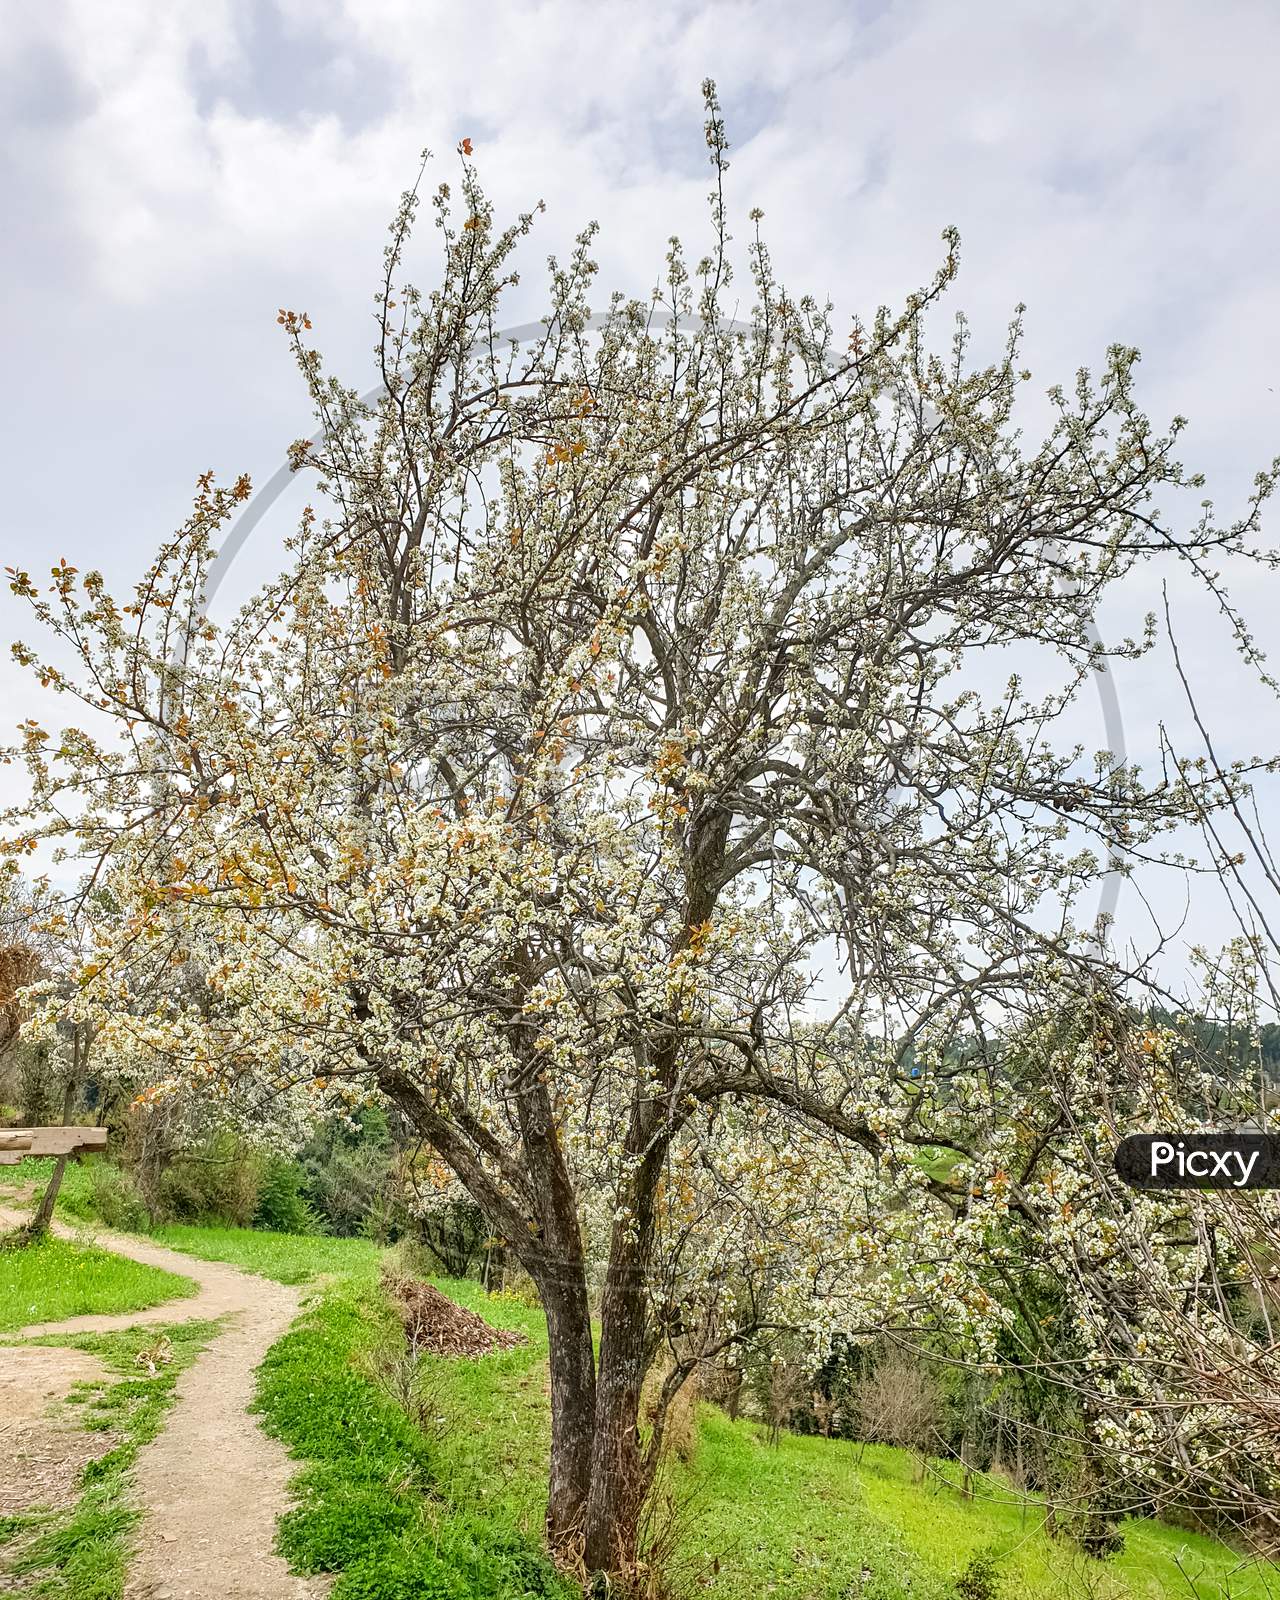 Portrait of beautiful pear blossom tree in spring season with cloudy weather in hilly area of Himachal Pradesh, India